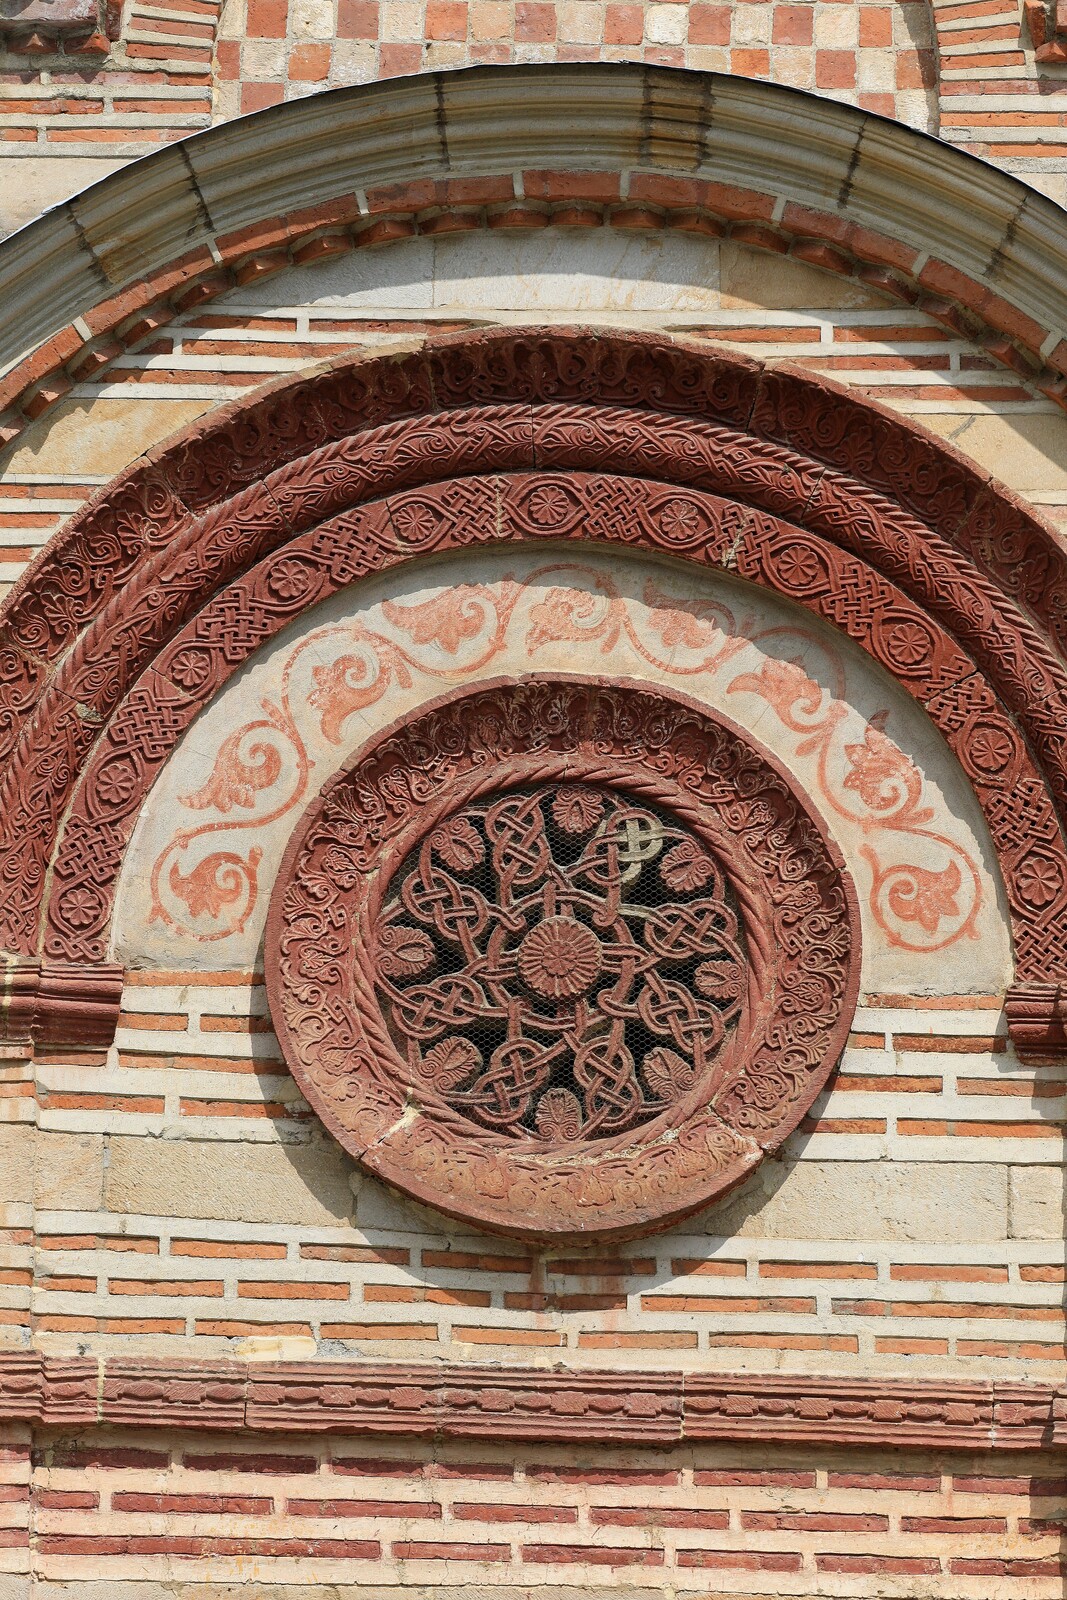 Archivolt and Rosette on the South Wall of the Narthex